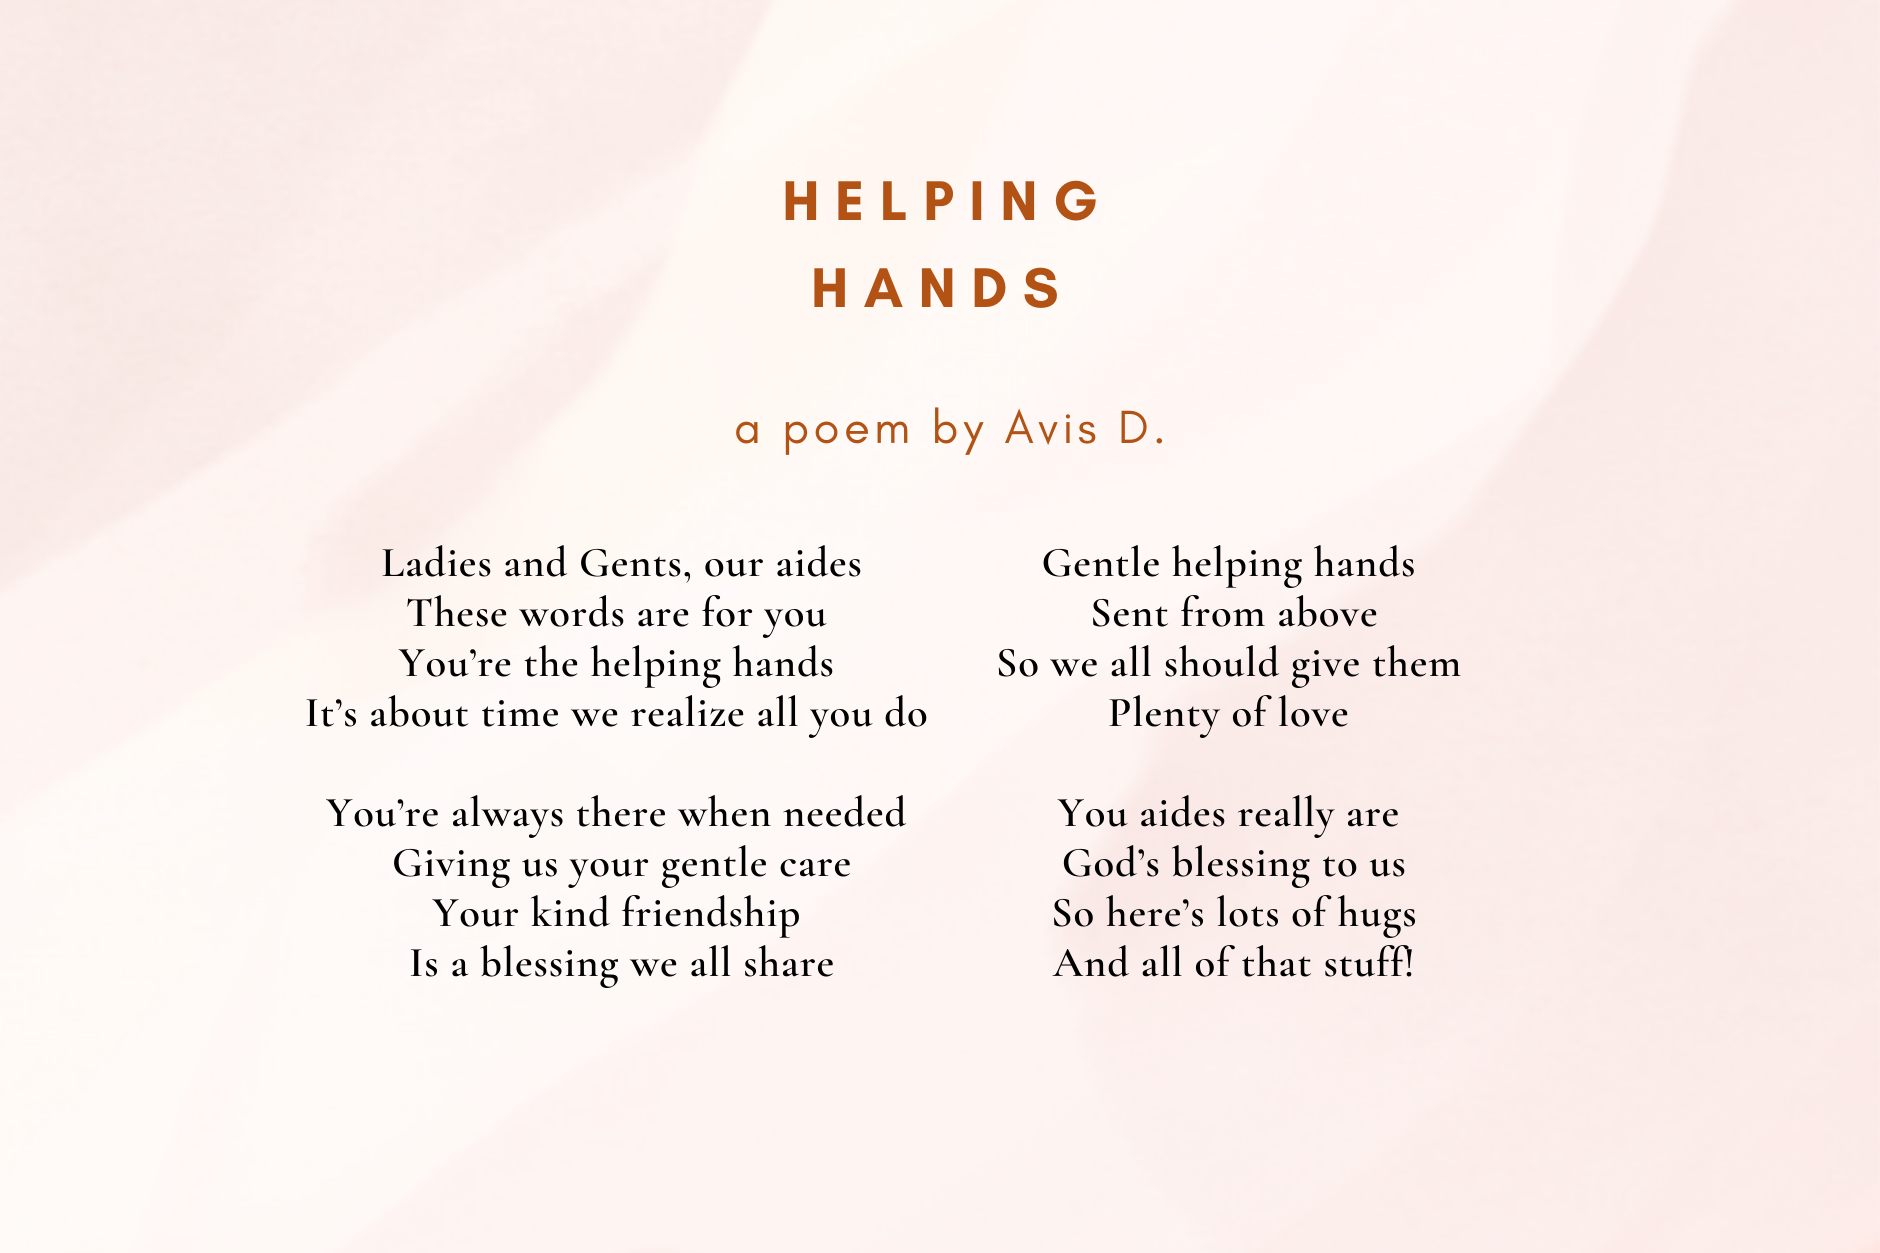 Helping Hands, a poem by Avis D.